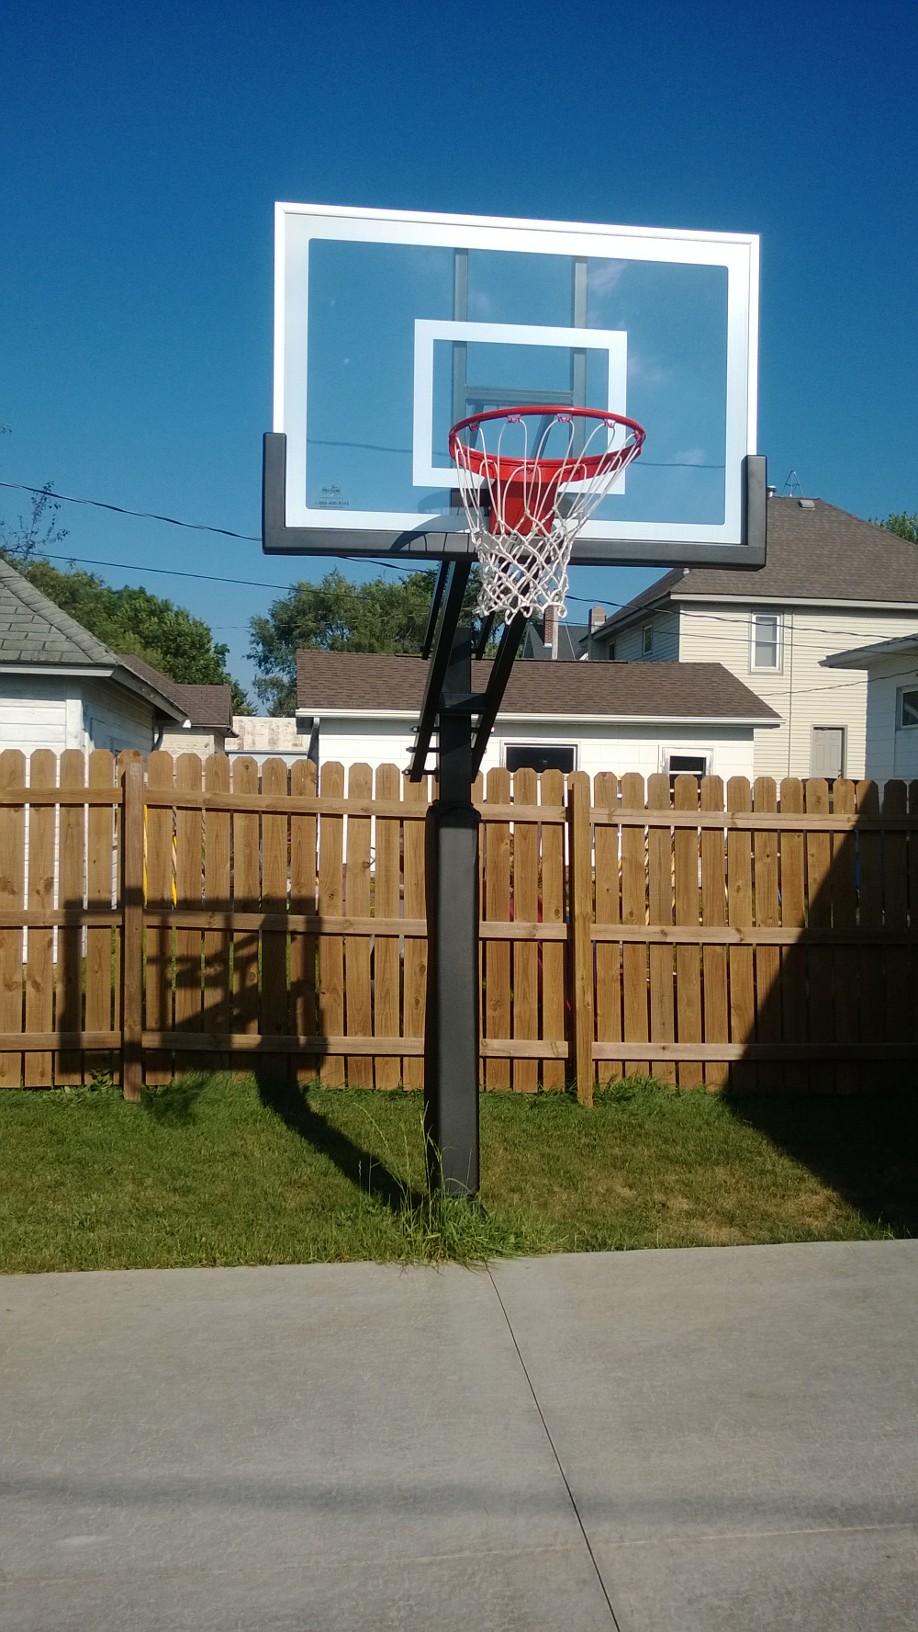 The Pro Dunk Silver basketball system is centered on the expansion joint of this backyard basketball court.